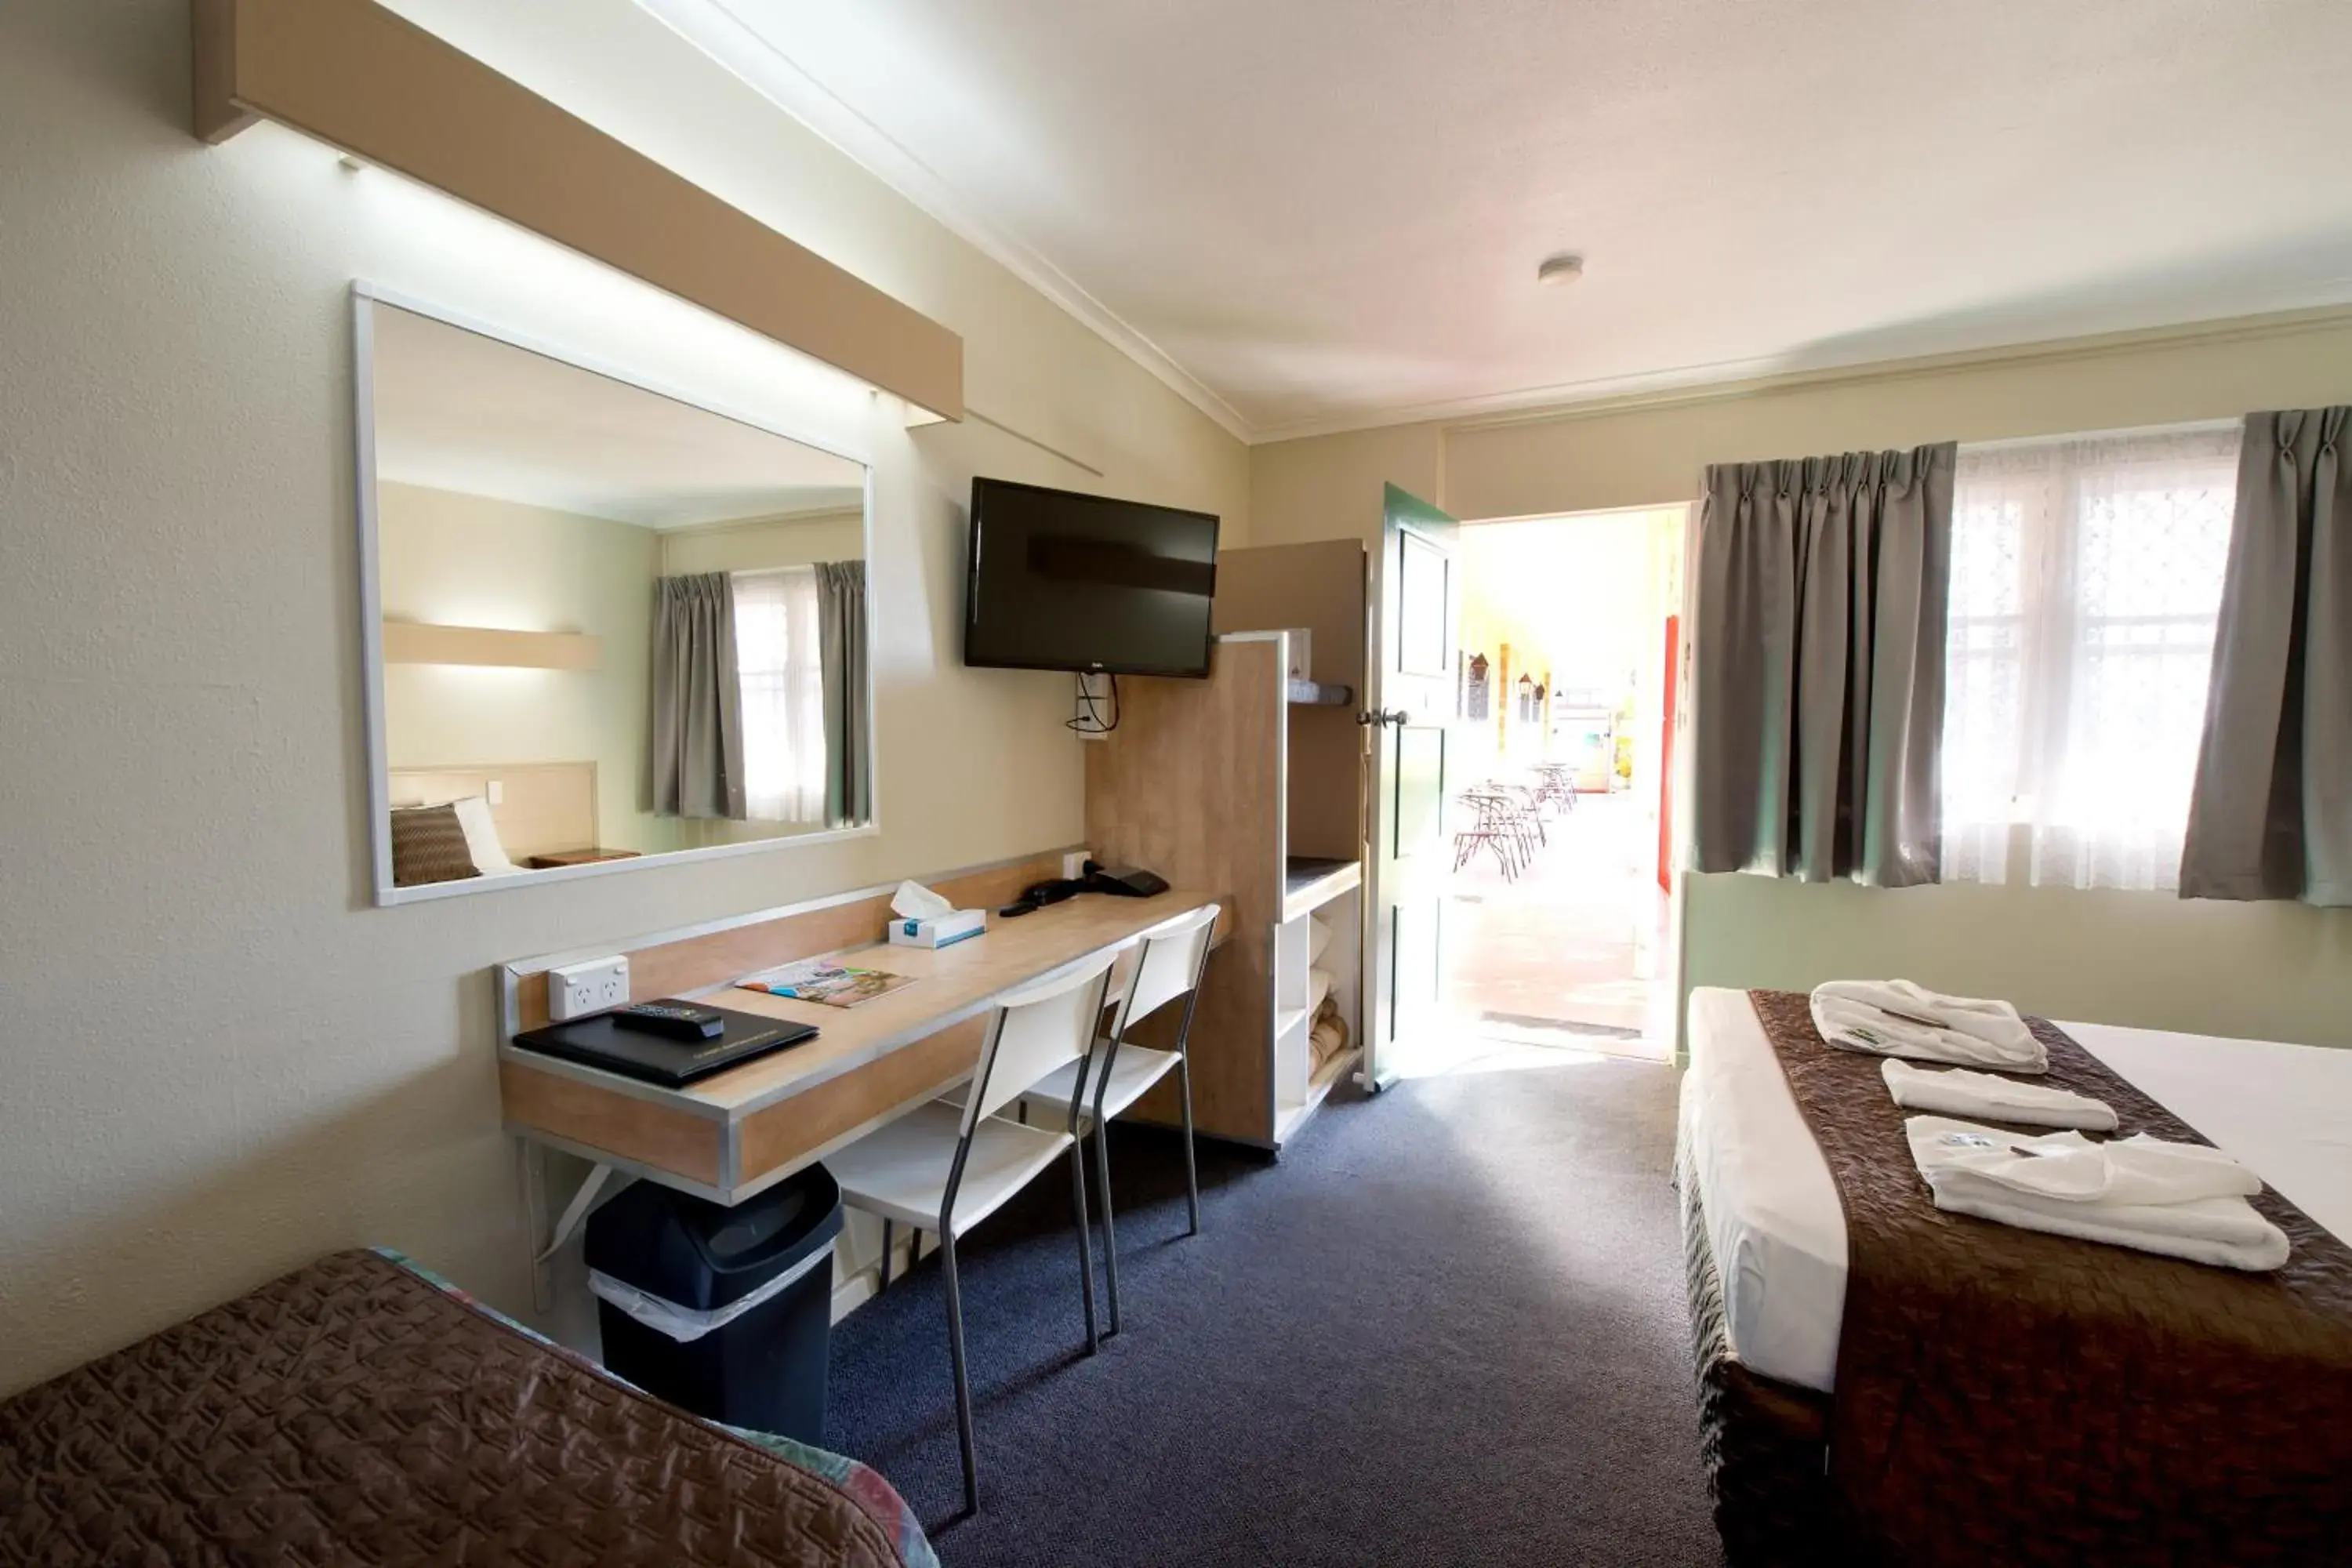 TV and multimedia, Room Photo in Mineral Sands Motel